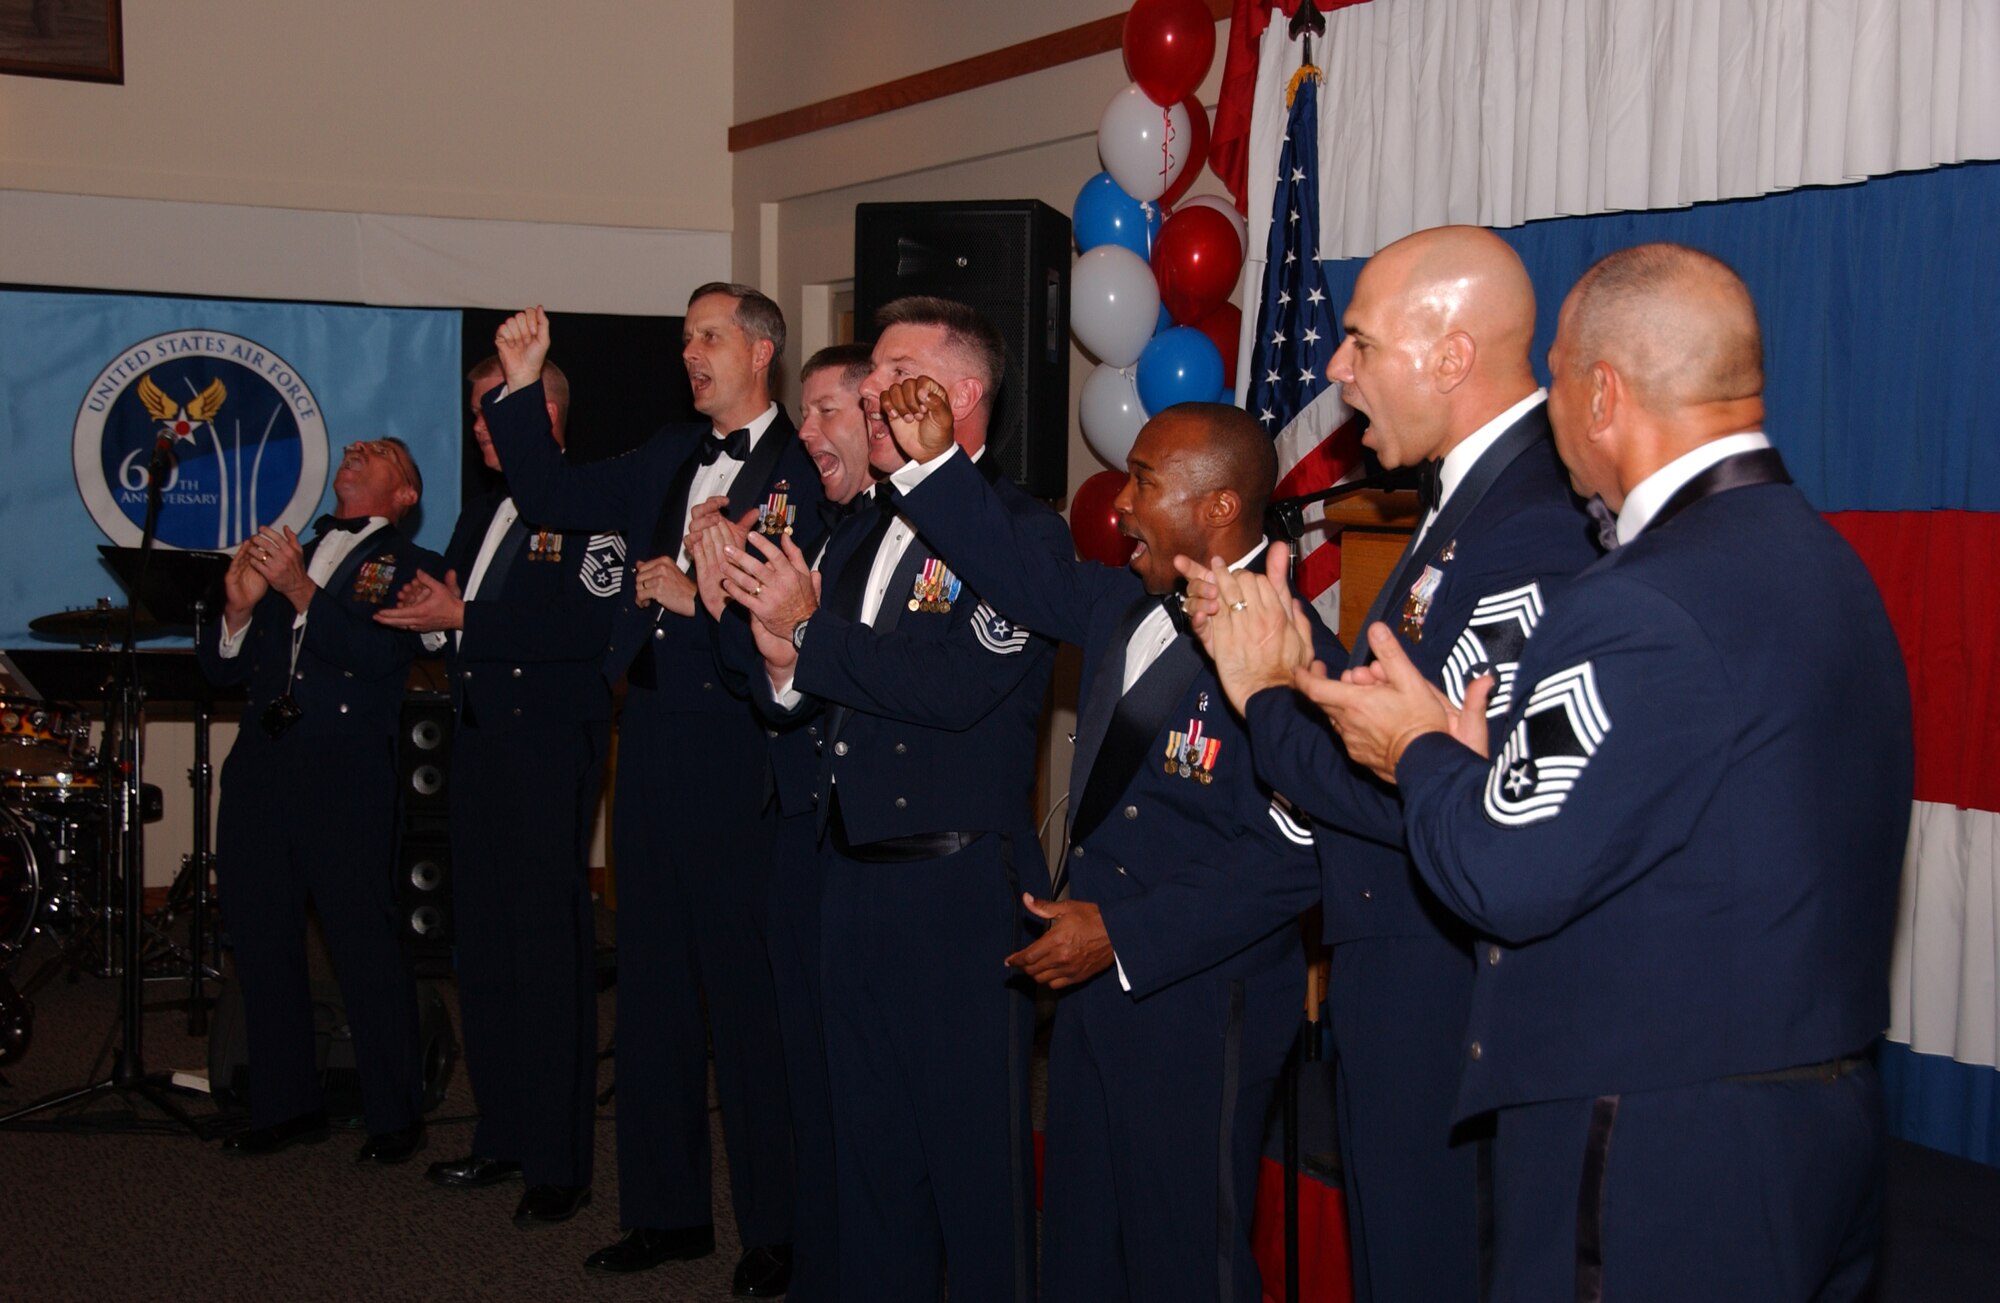 EIELSON AIR FORCE BASE, Alaska -- Eielson's chief master sergeants lead Gala attendees in a rousing rendition of the service's official song "The U.S. Air Force." Originally, the song was known as the 'Army Air Corps Song' the lyrics and music were written in 1939 and the words "U.S. Air Force" have since replaced the original "Army Air Corps". (U.S. Air Force Photo by Airman 1st Class Jonathan Snyder)